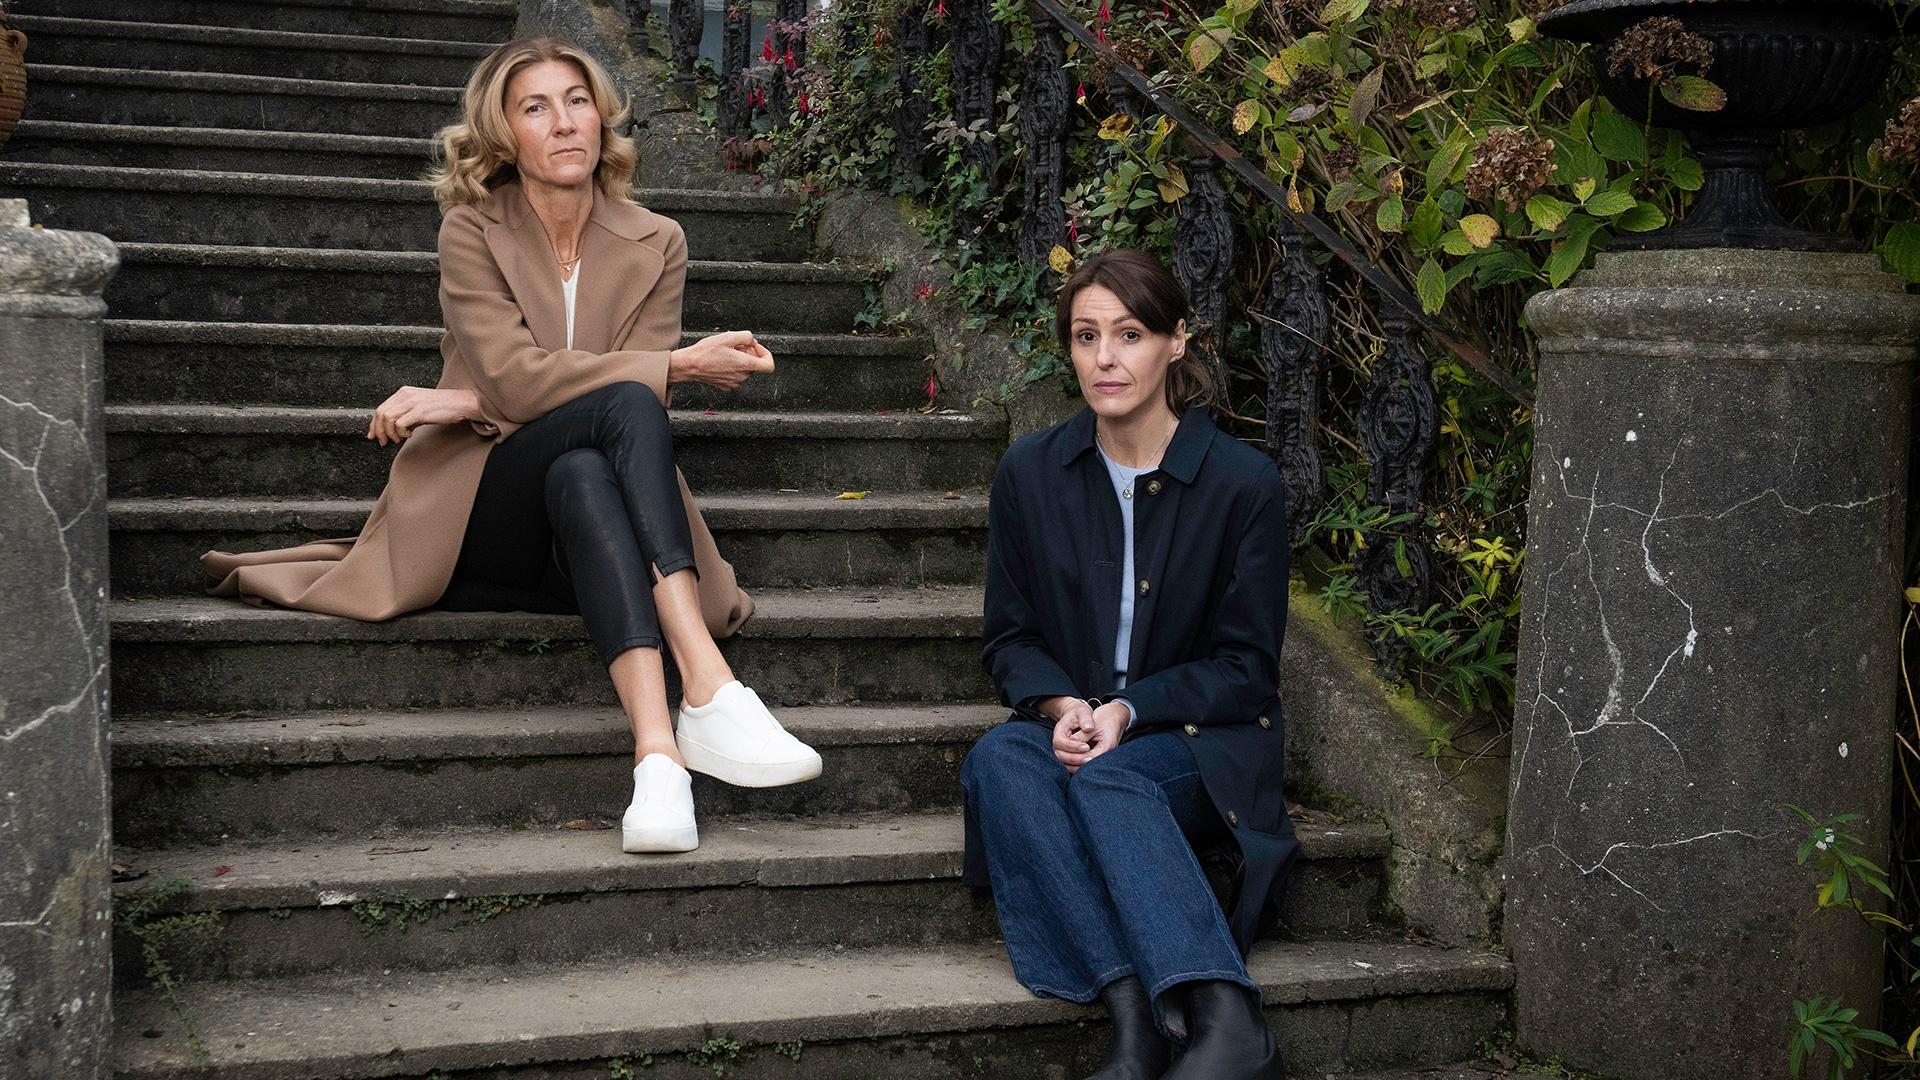 Eve Best as Rosaline and Suranne Jones as Becca featured in MaryLand from Masterpiece.